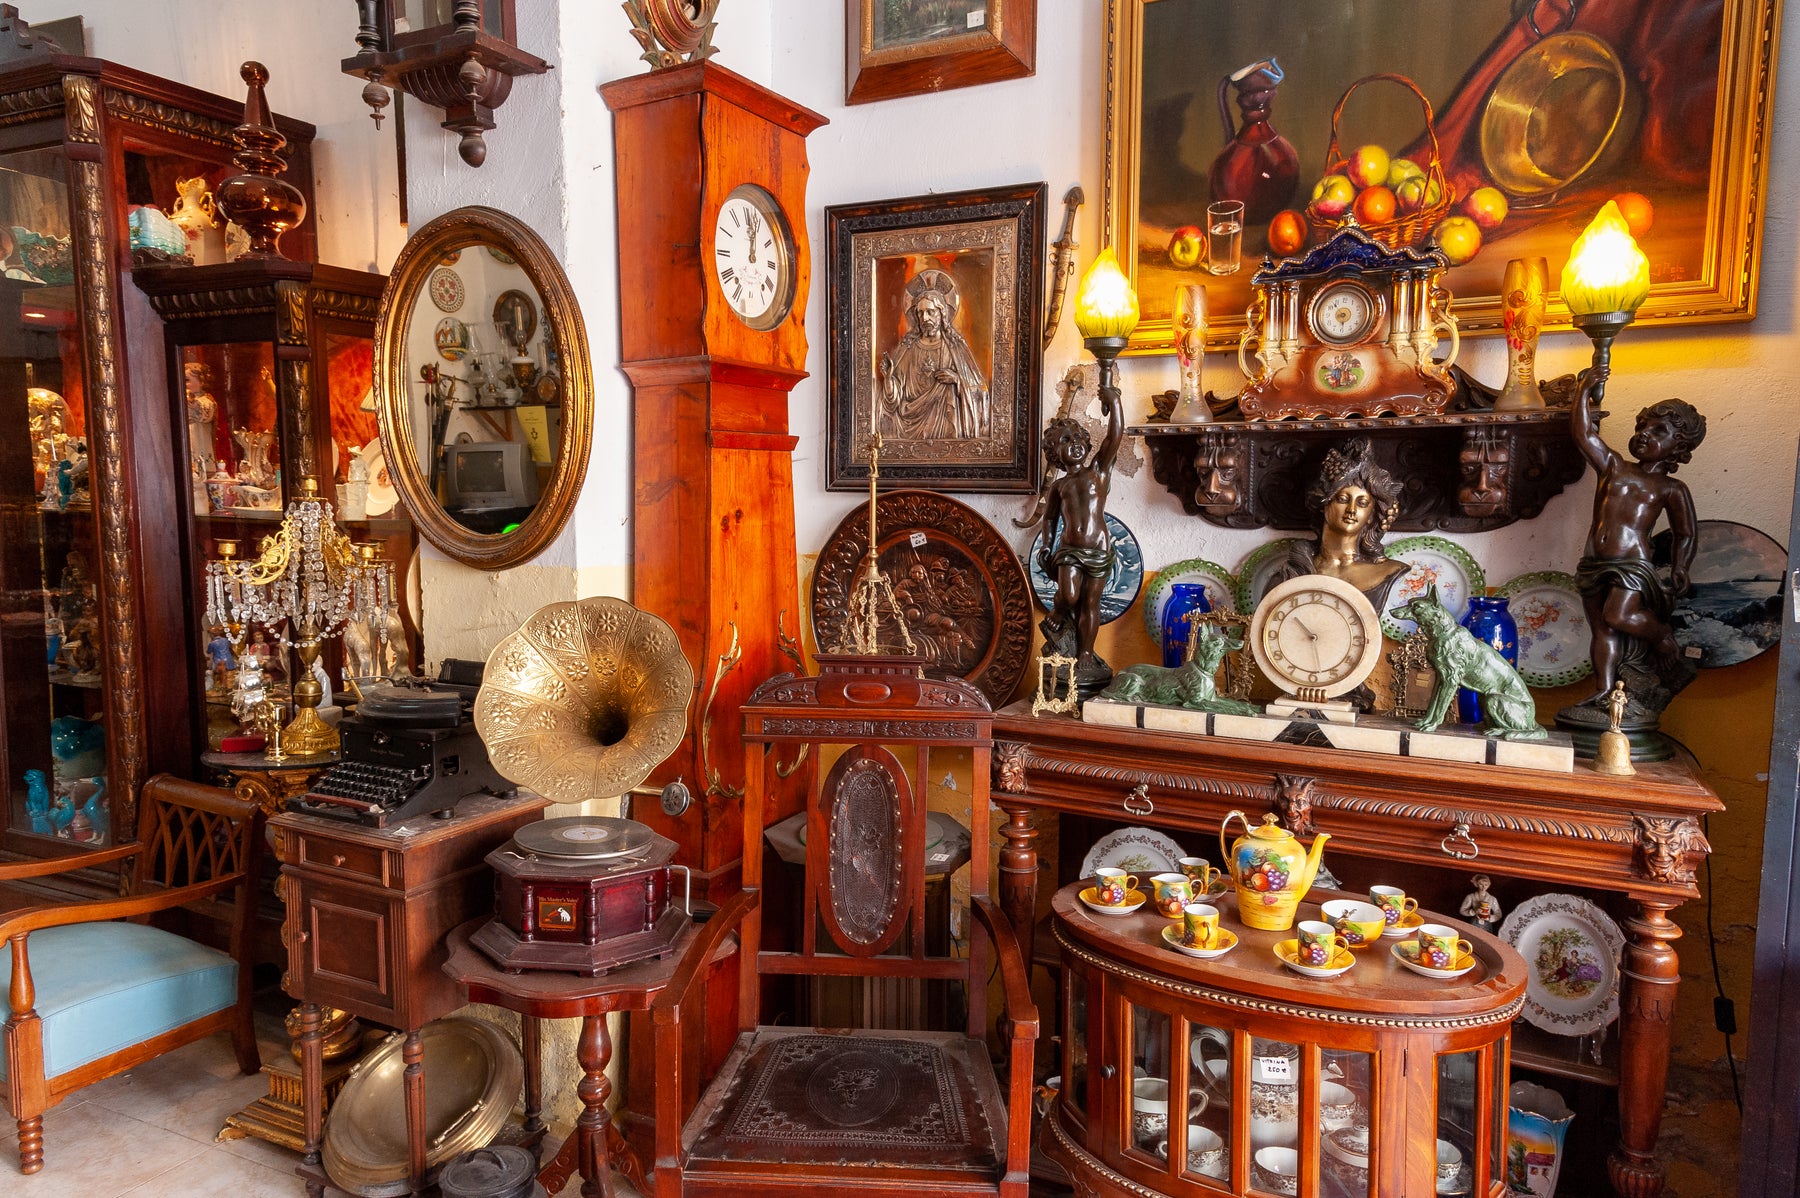 5 questions to ask an antique dealer